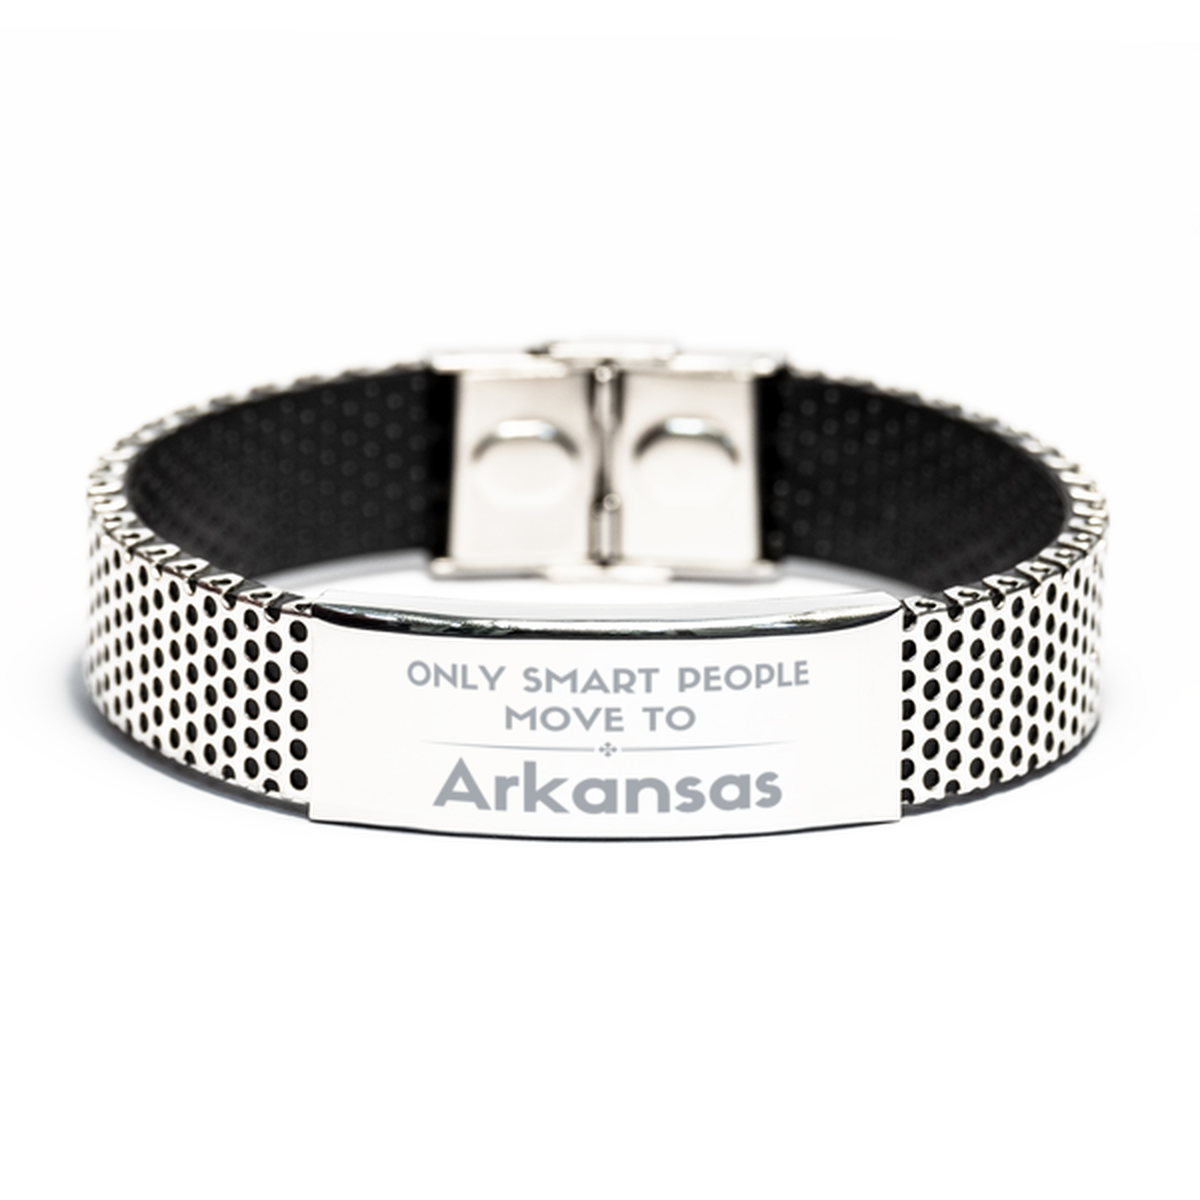 Only smart people move to Arkansas Stainless Steel Bracelet, Gag Gifts For Arkansas, Move to Arkansas Gifts for Friends Coworker Funny Saying Quote